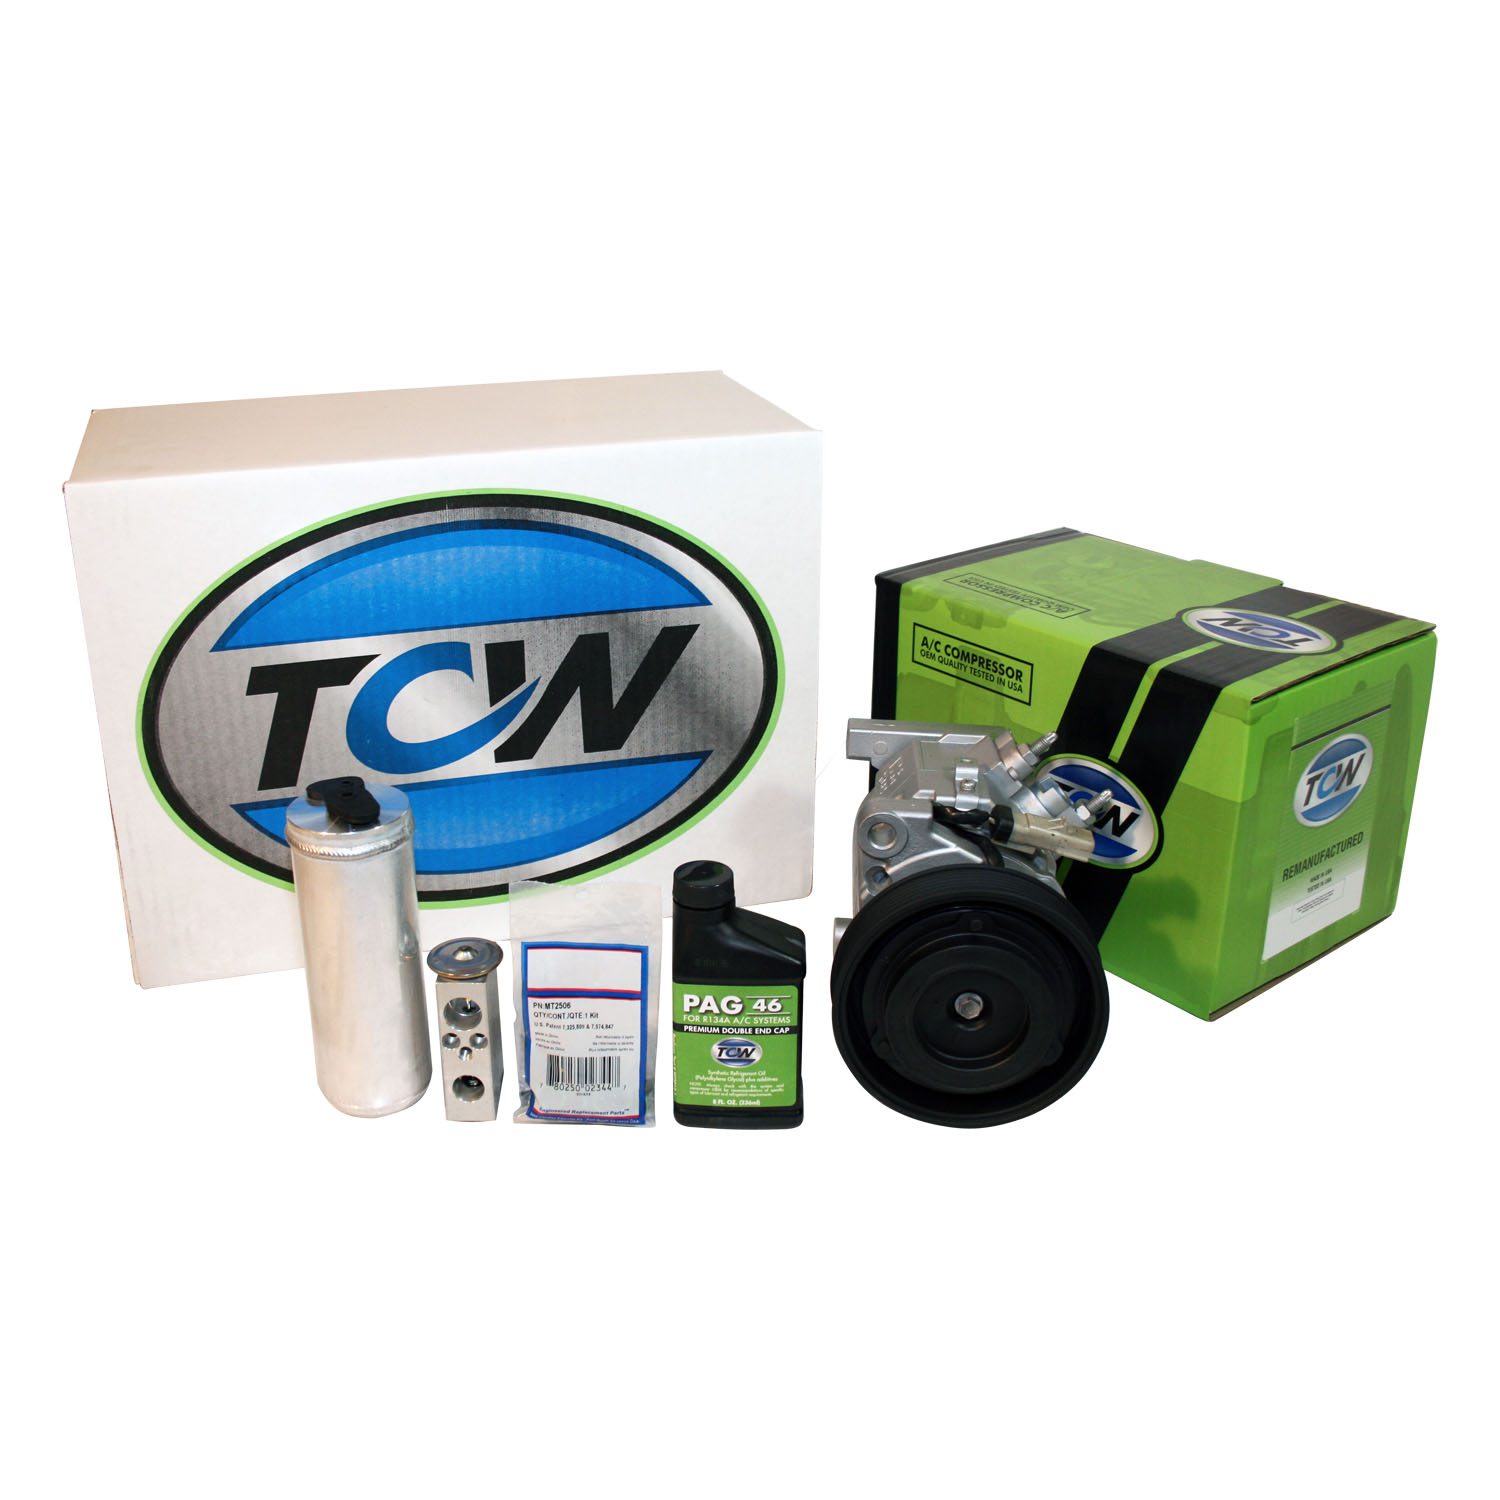 TCW Vehicle A/C Kit K1000209R Remanufactured